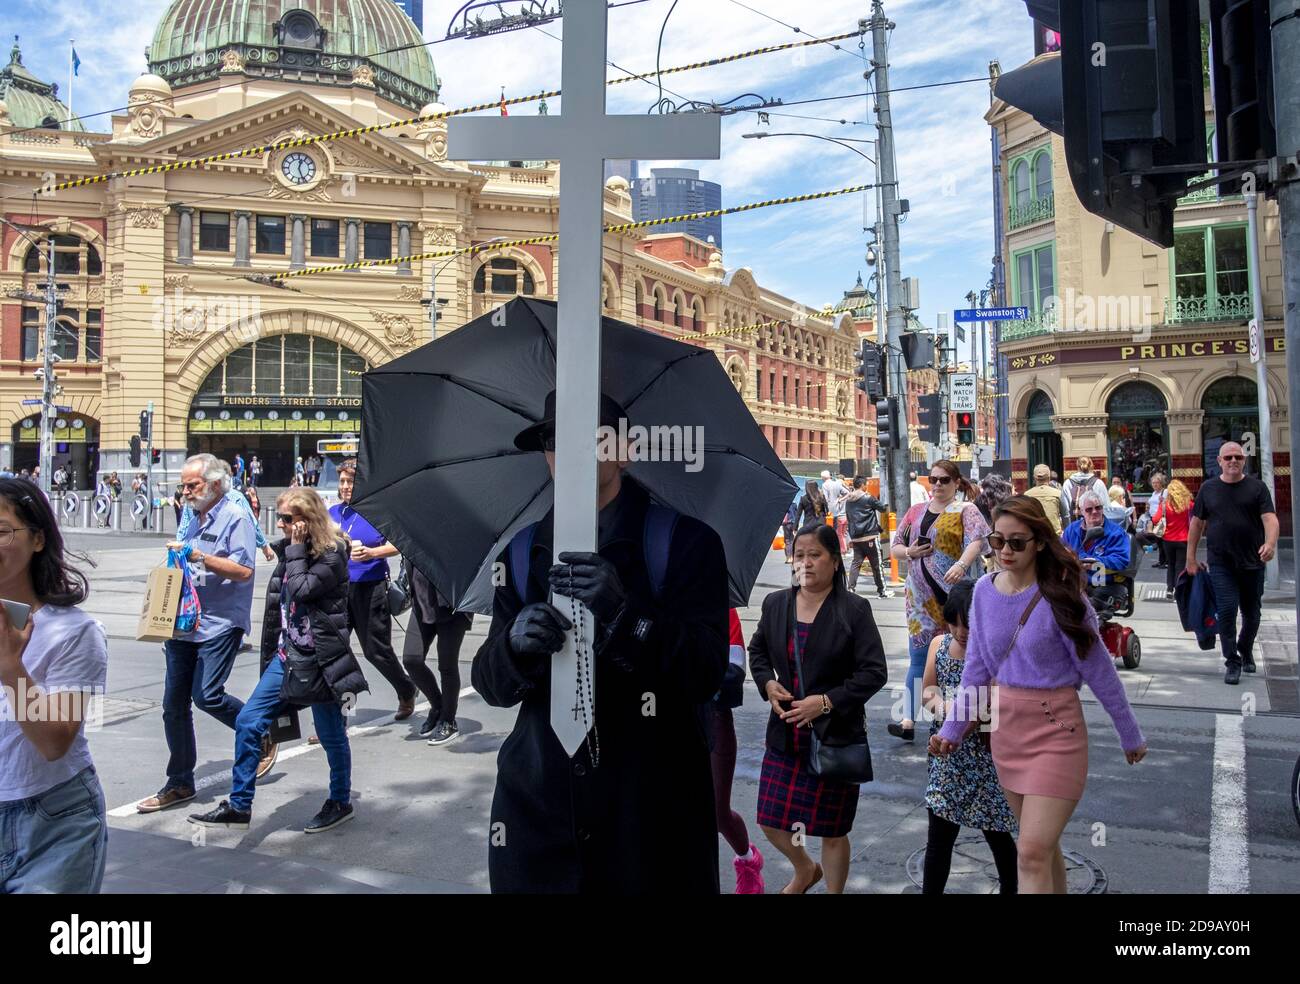 A christian evangelist parades with his cross through the streets of Melbourne. Stock Photo